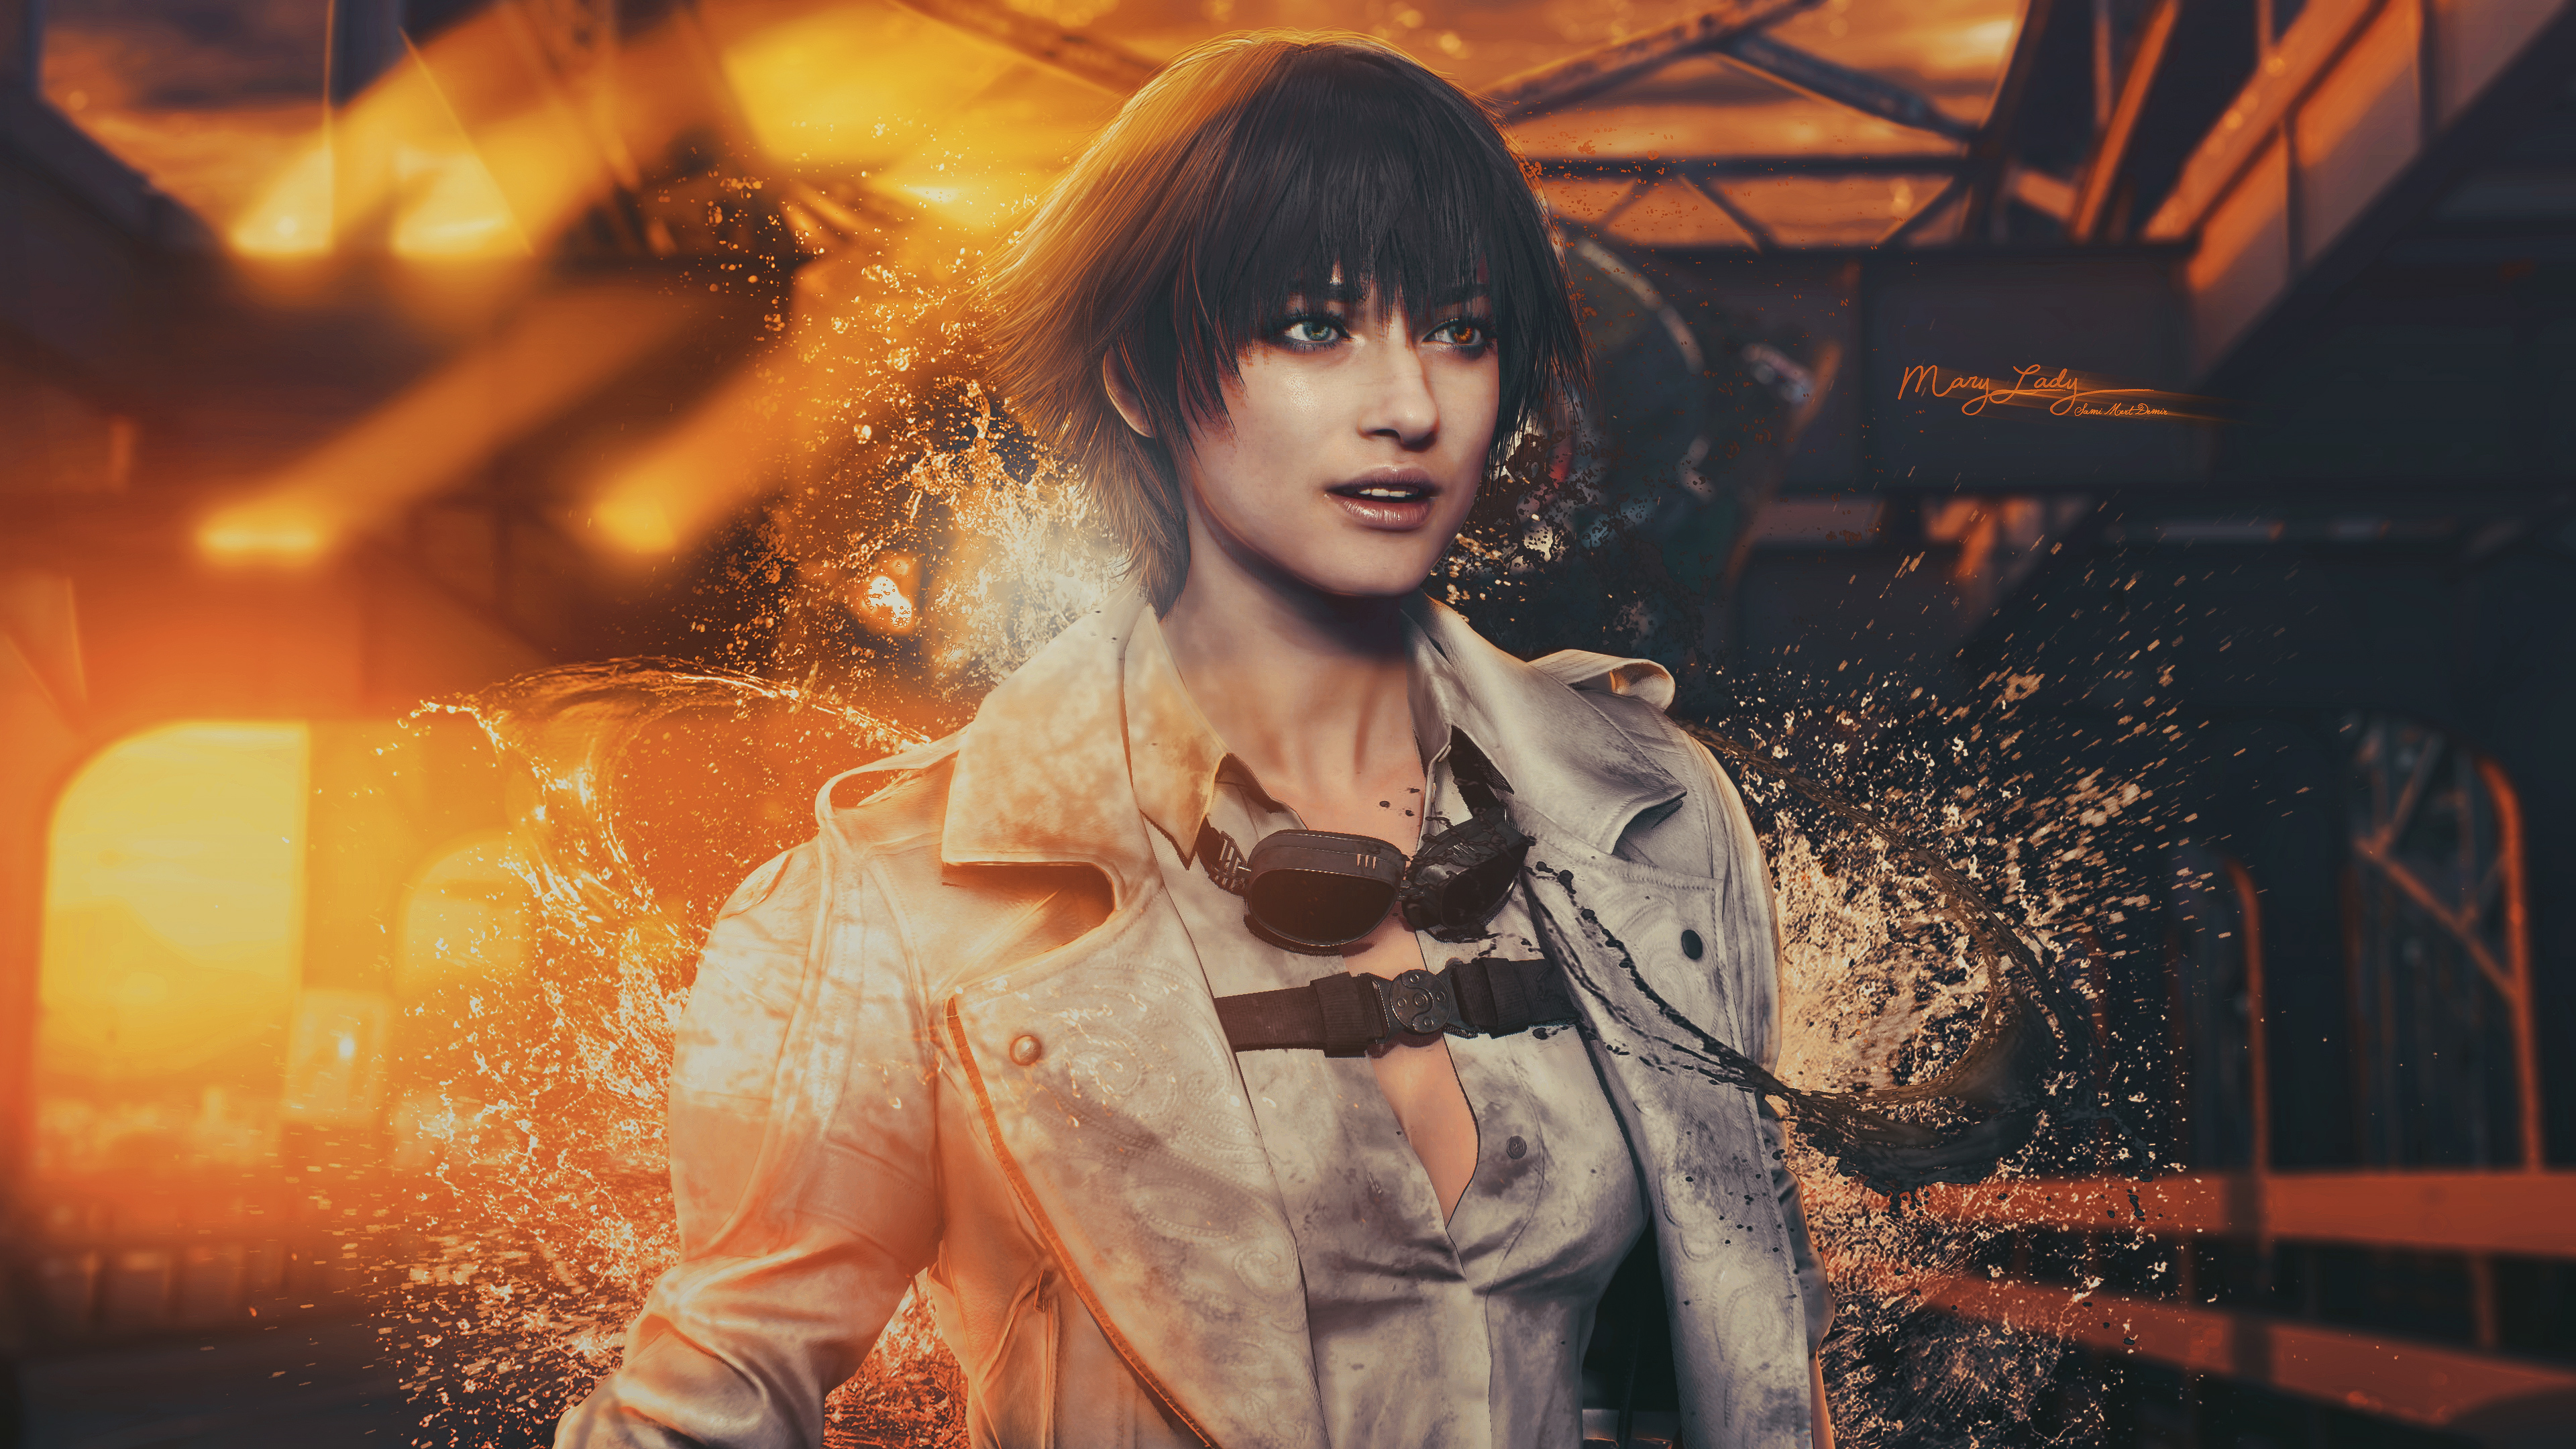 Devil May Cry Devil May Cry 5 Andrea Tivadar Women Sunset Heterochromia Sun Rays Water Splash Video  3840x2160